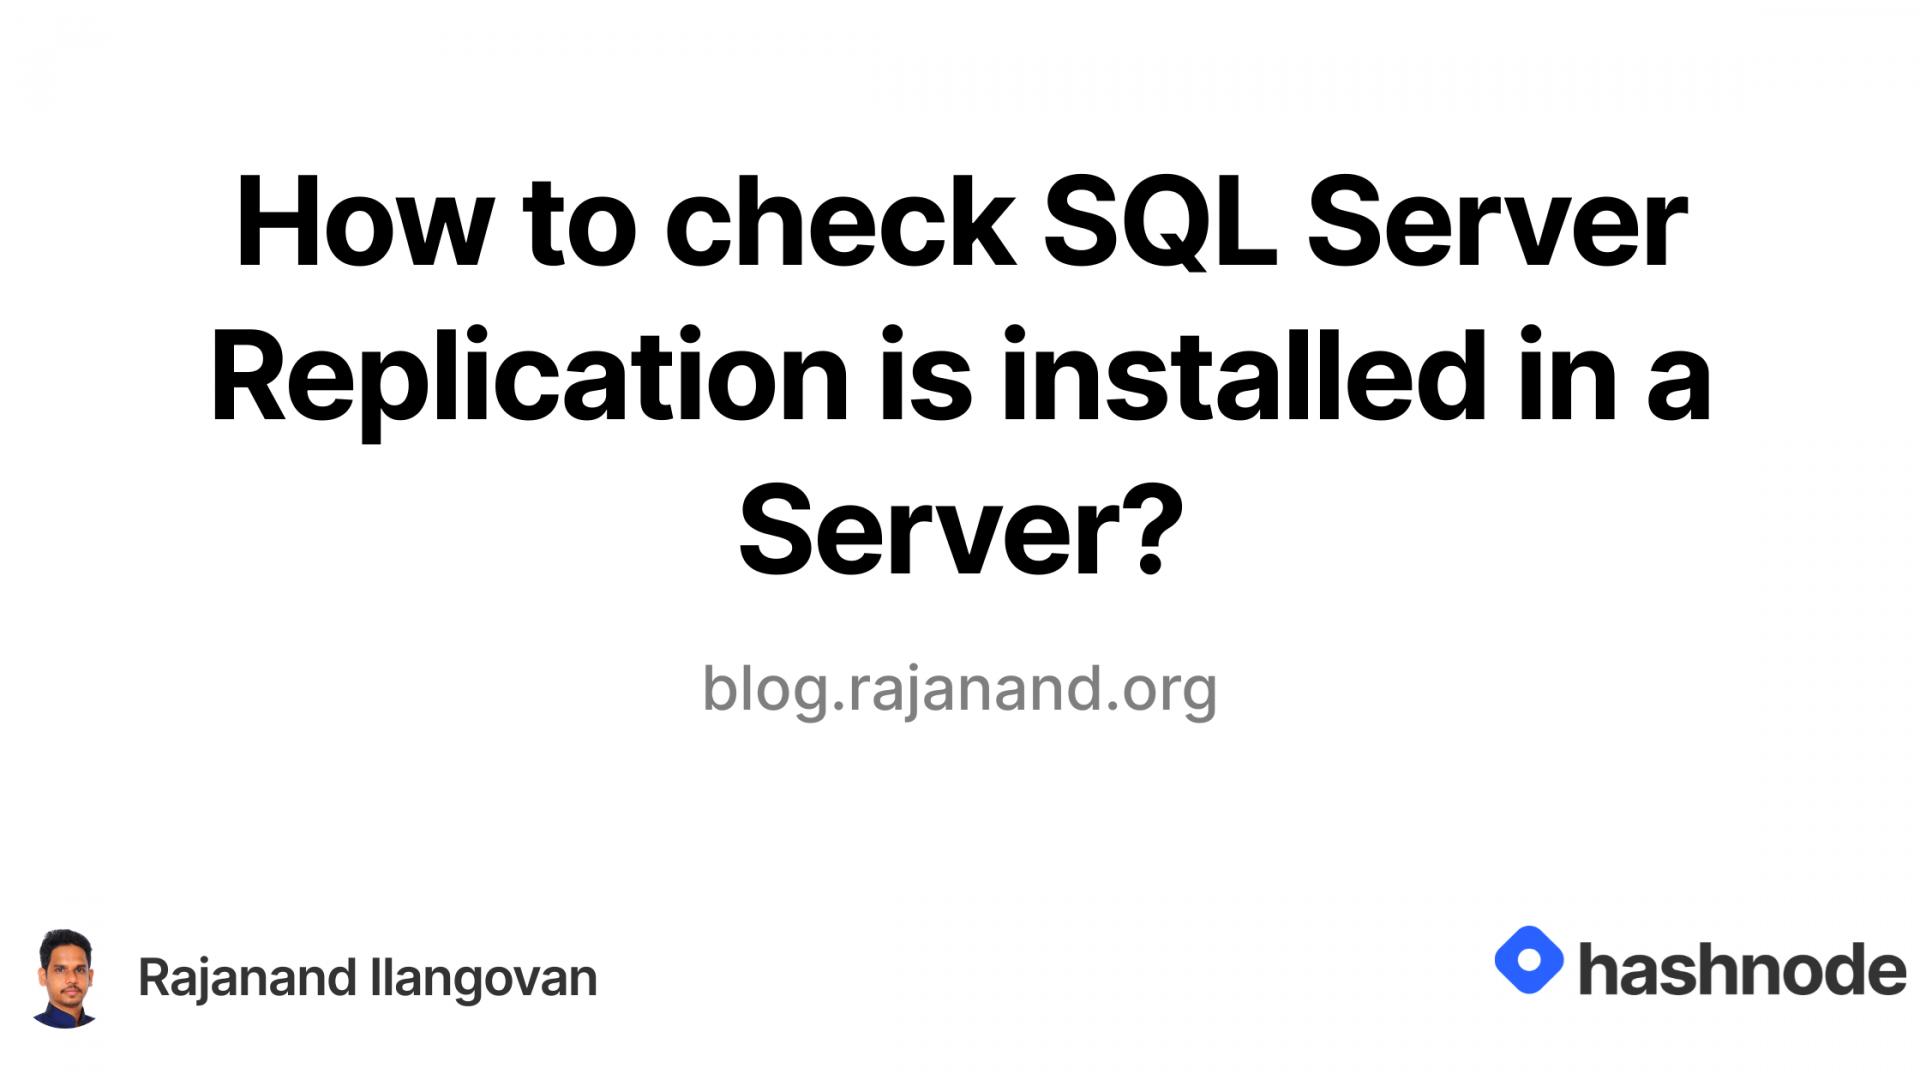 How to check SQL Server Replication is installed in a Server?